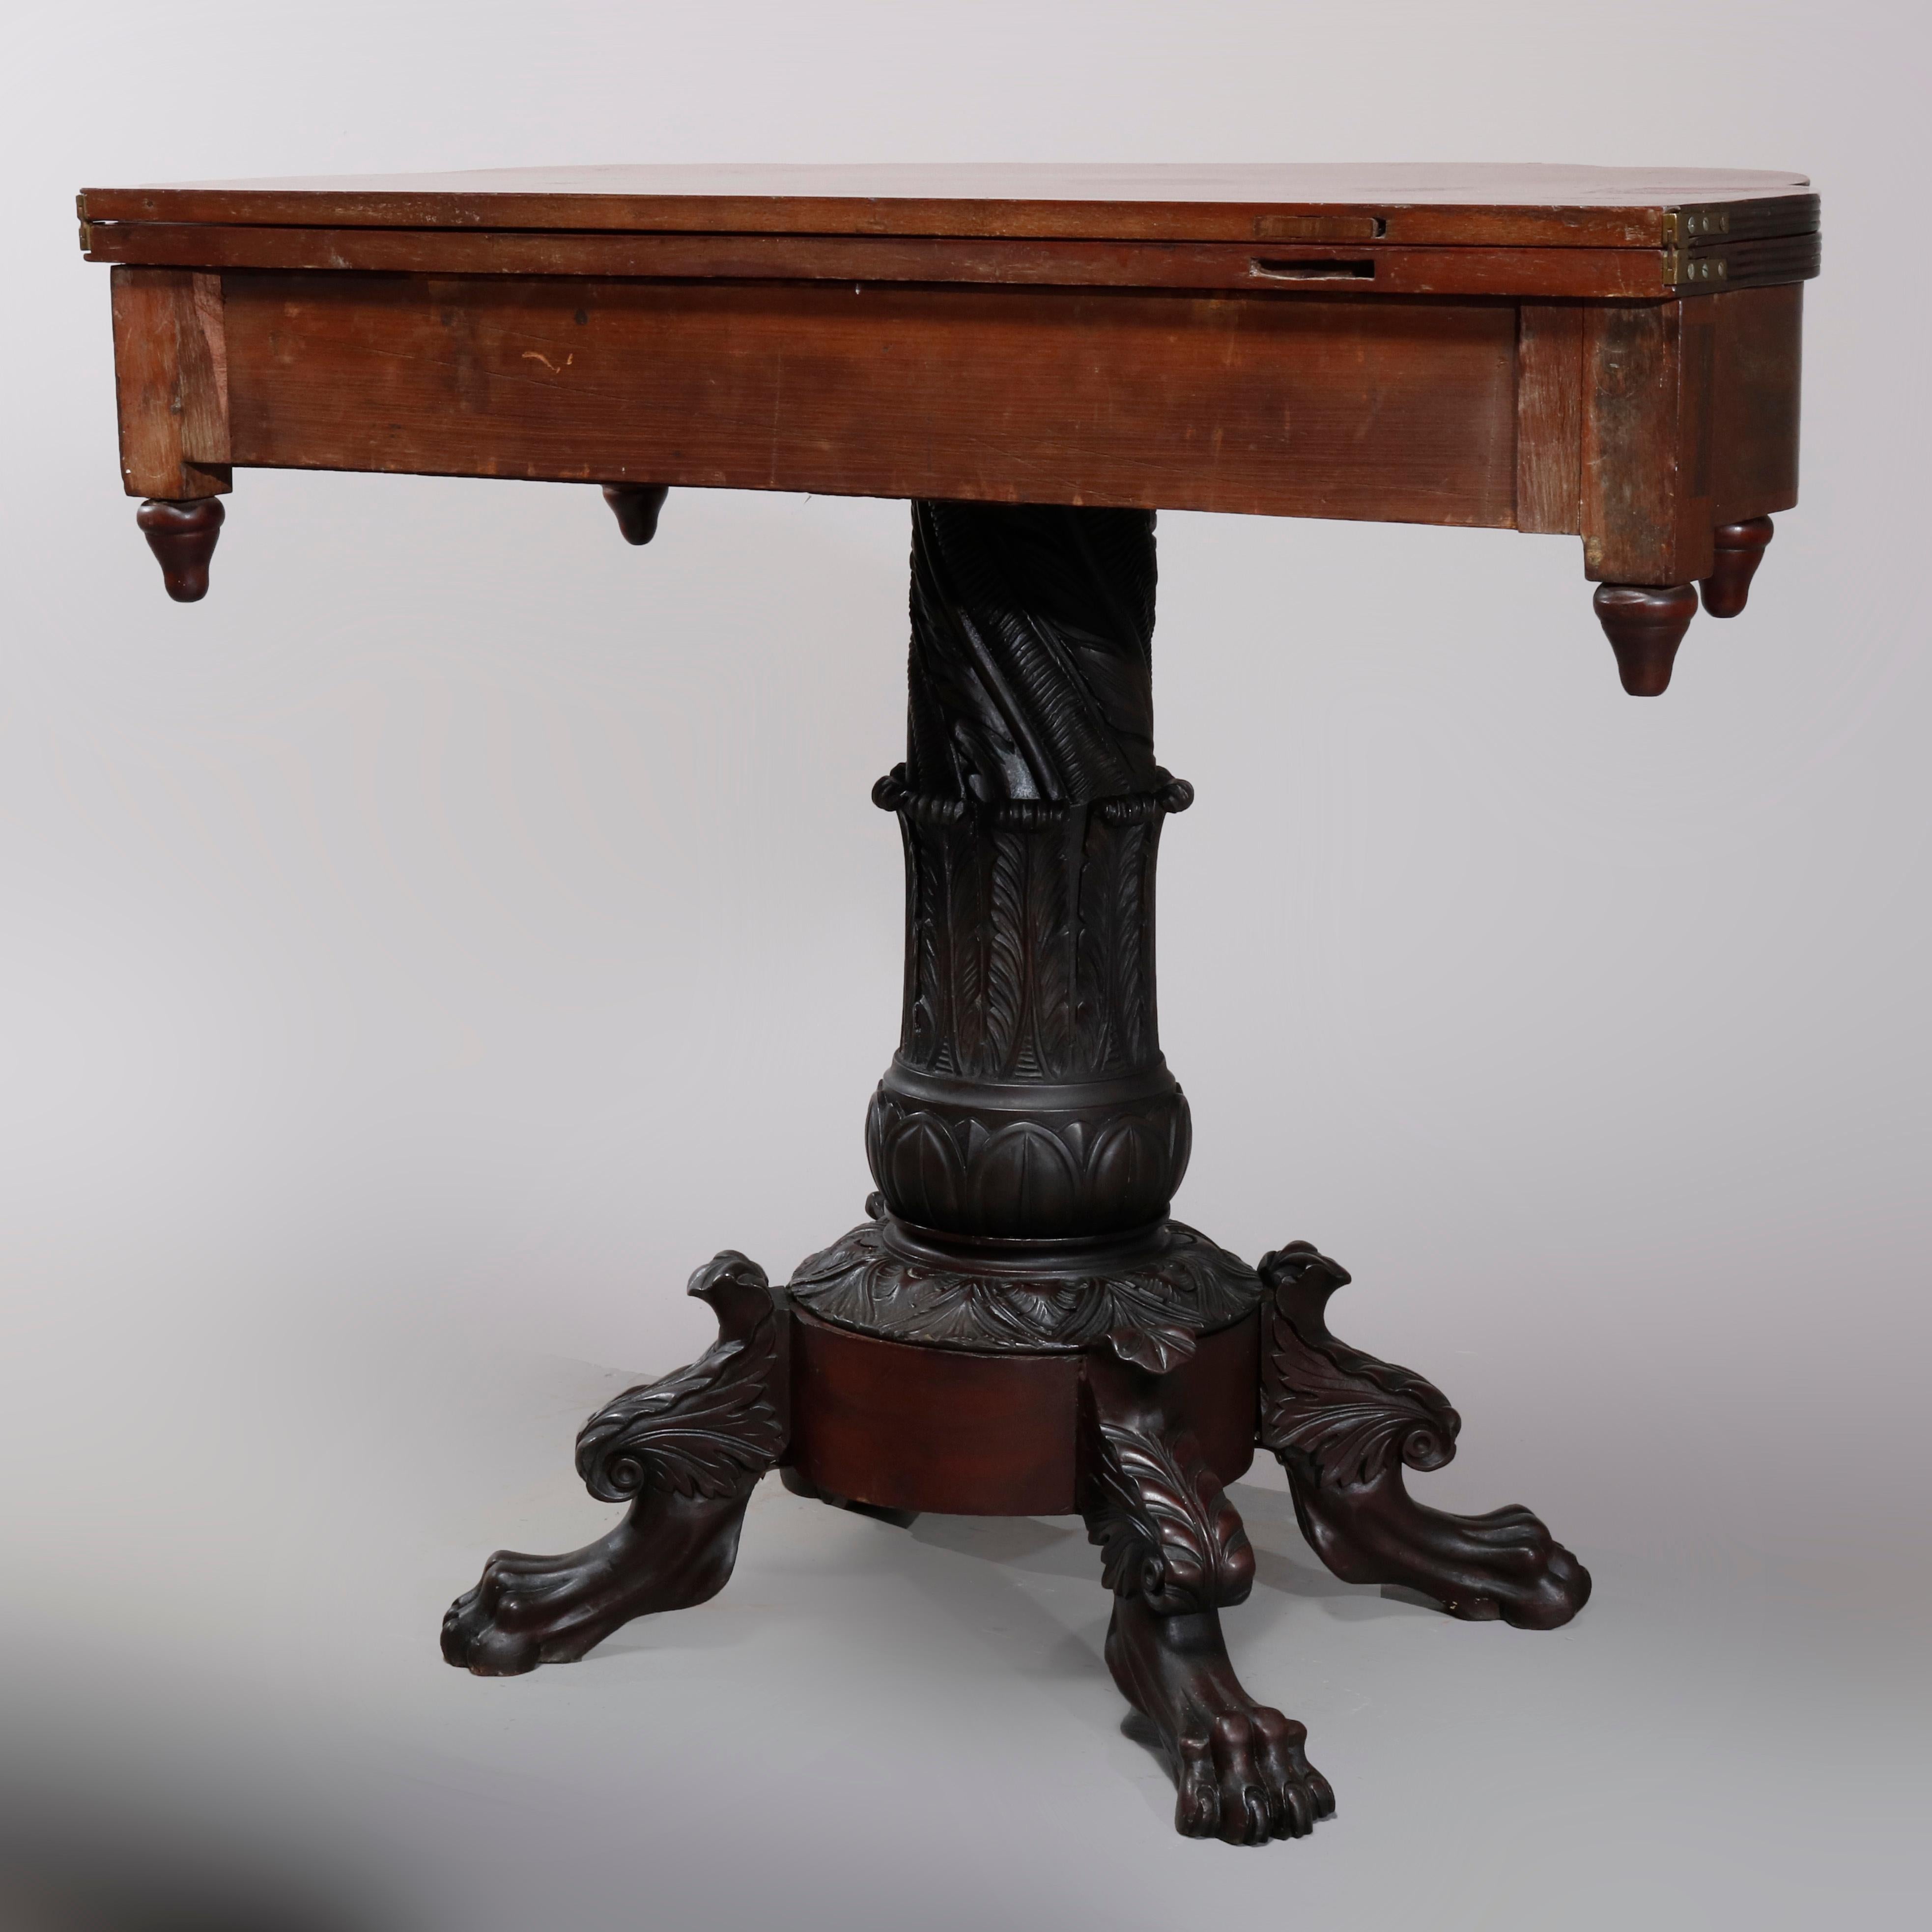 19th Century Antique American Empire Deeply Carved Flame Mahogany Game Table, circa 1840